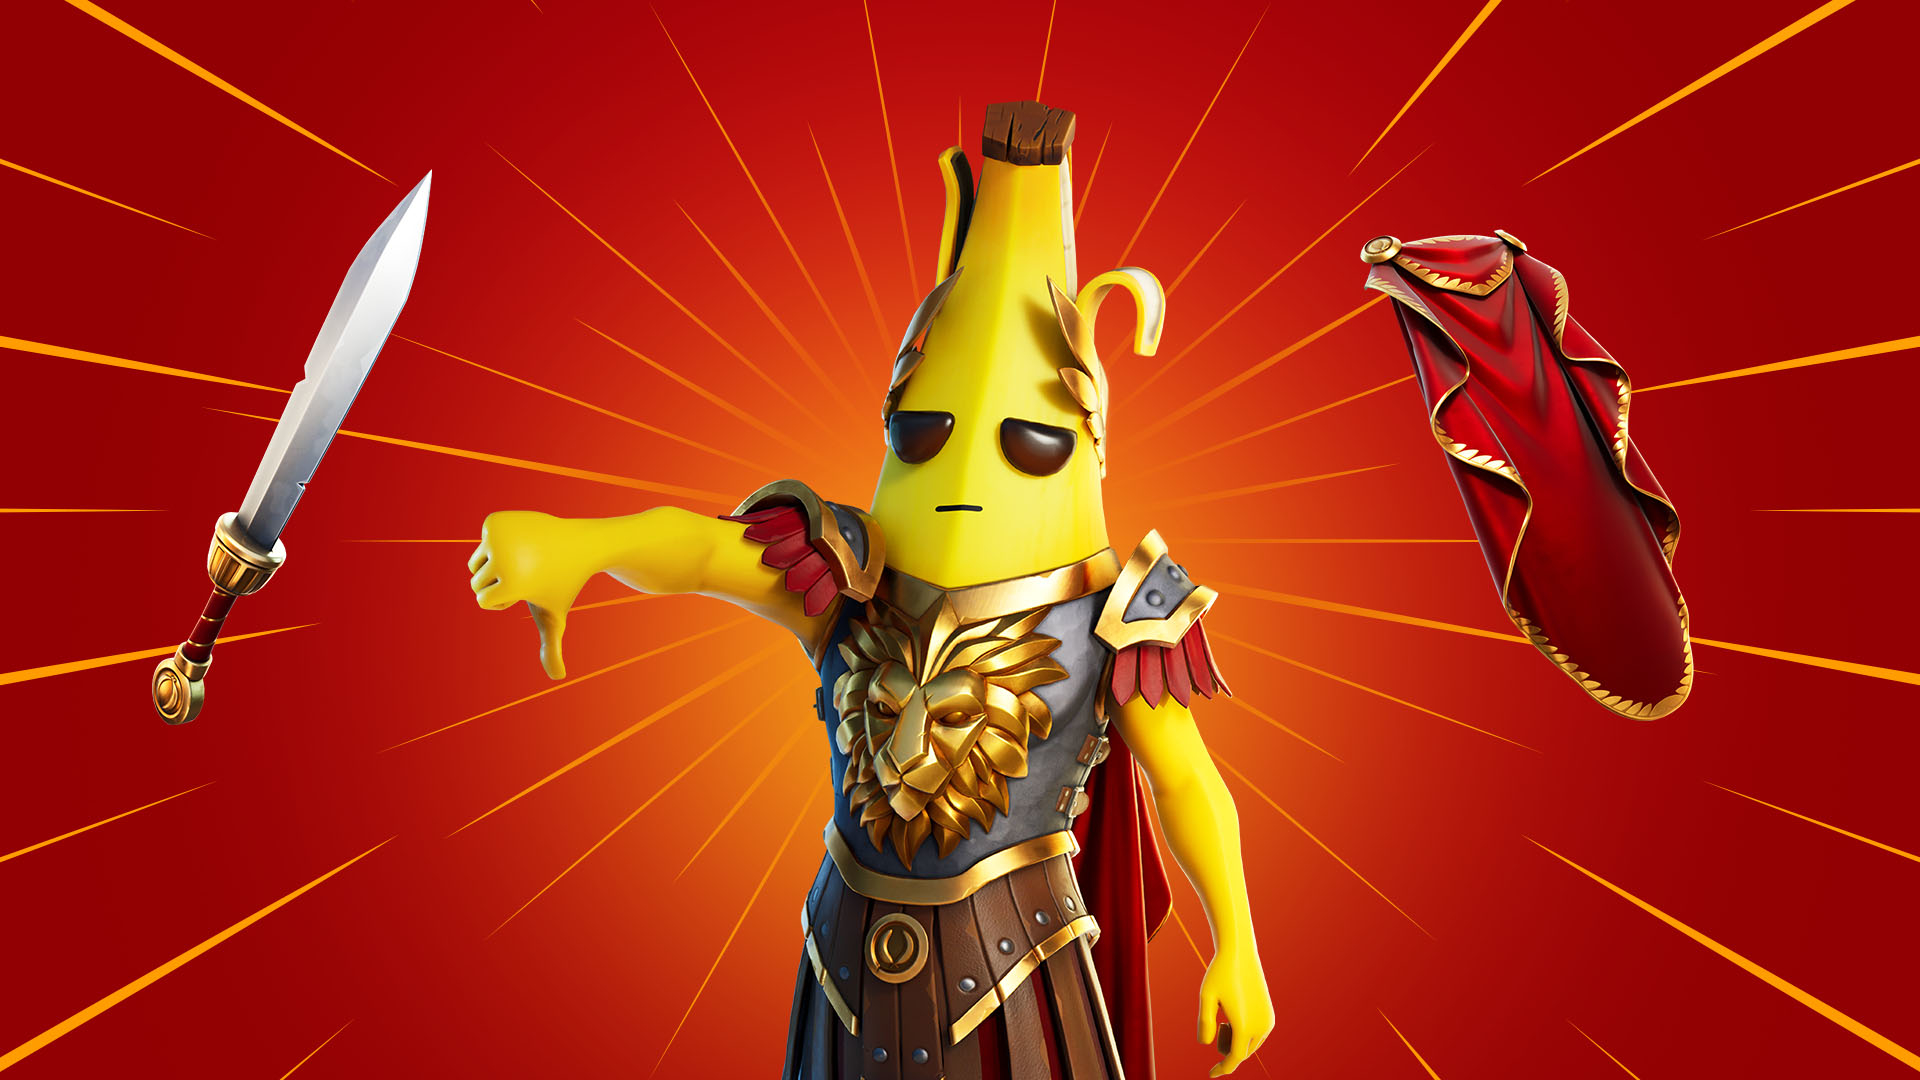 Download wallpapers Fortnite Gold Agent Peely Skin Fortnite main  characters gold stone background Gold Agent Peely Fortnite skins Gold  Agent Peely Skin Gold Agent Peely Fortnite Fortnite characters for  desktop with resolution